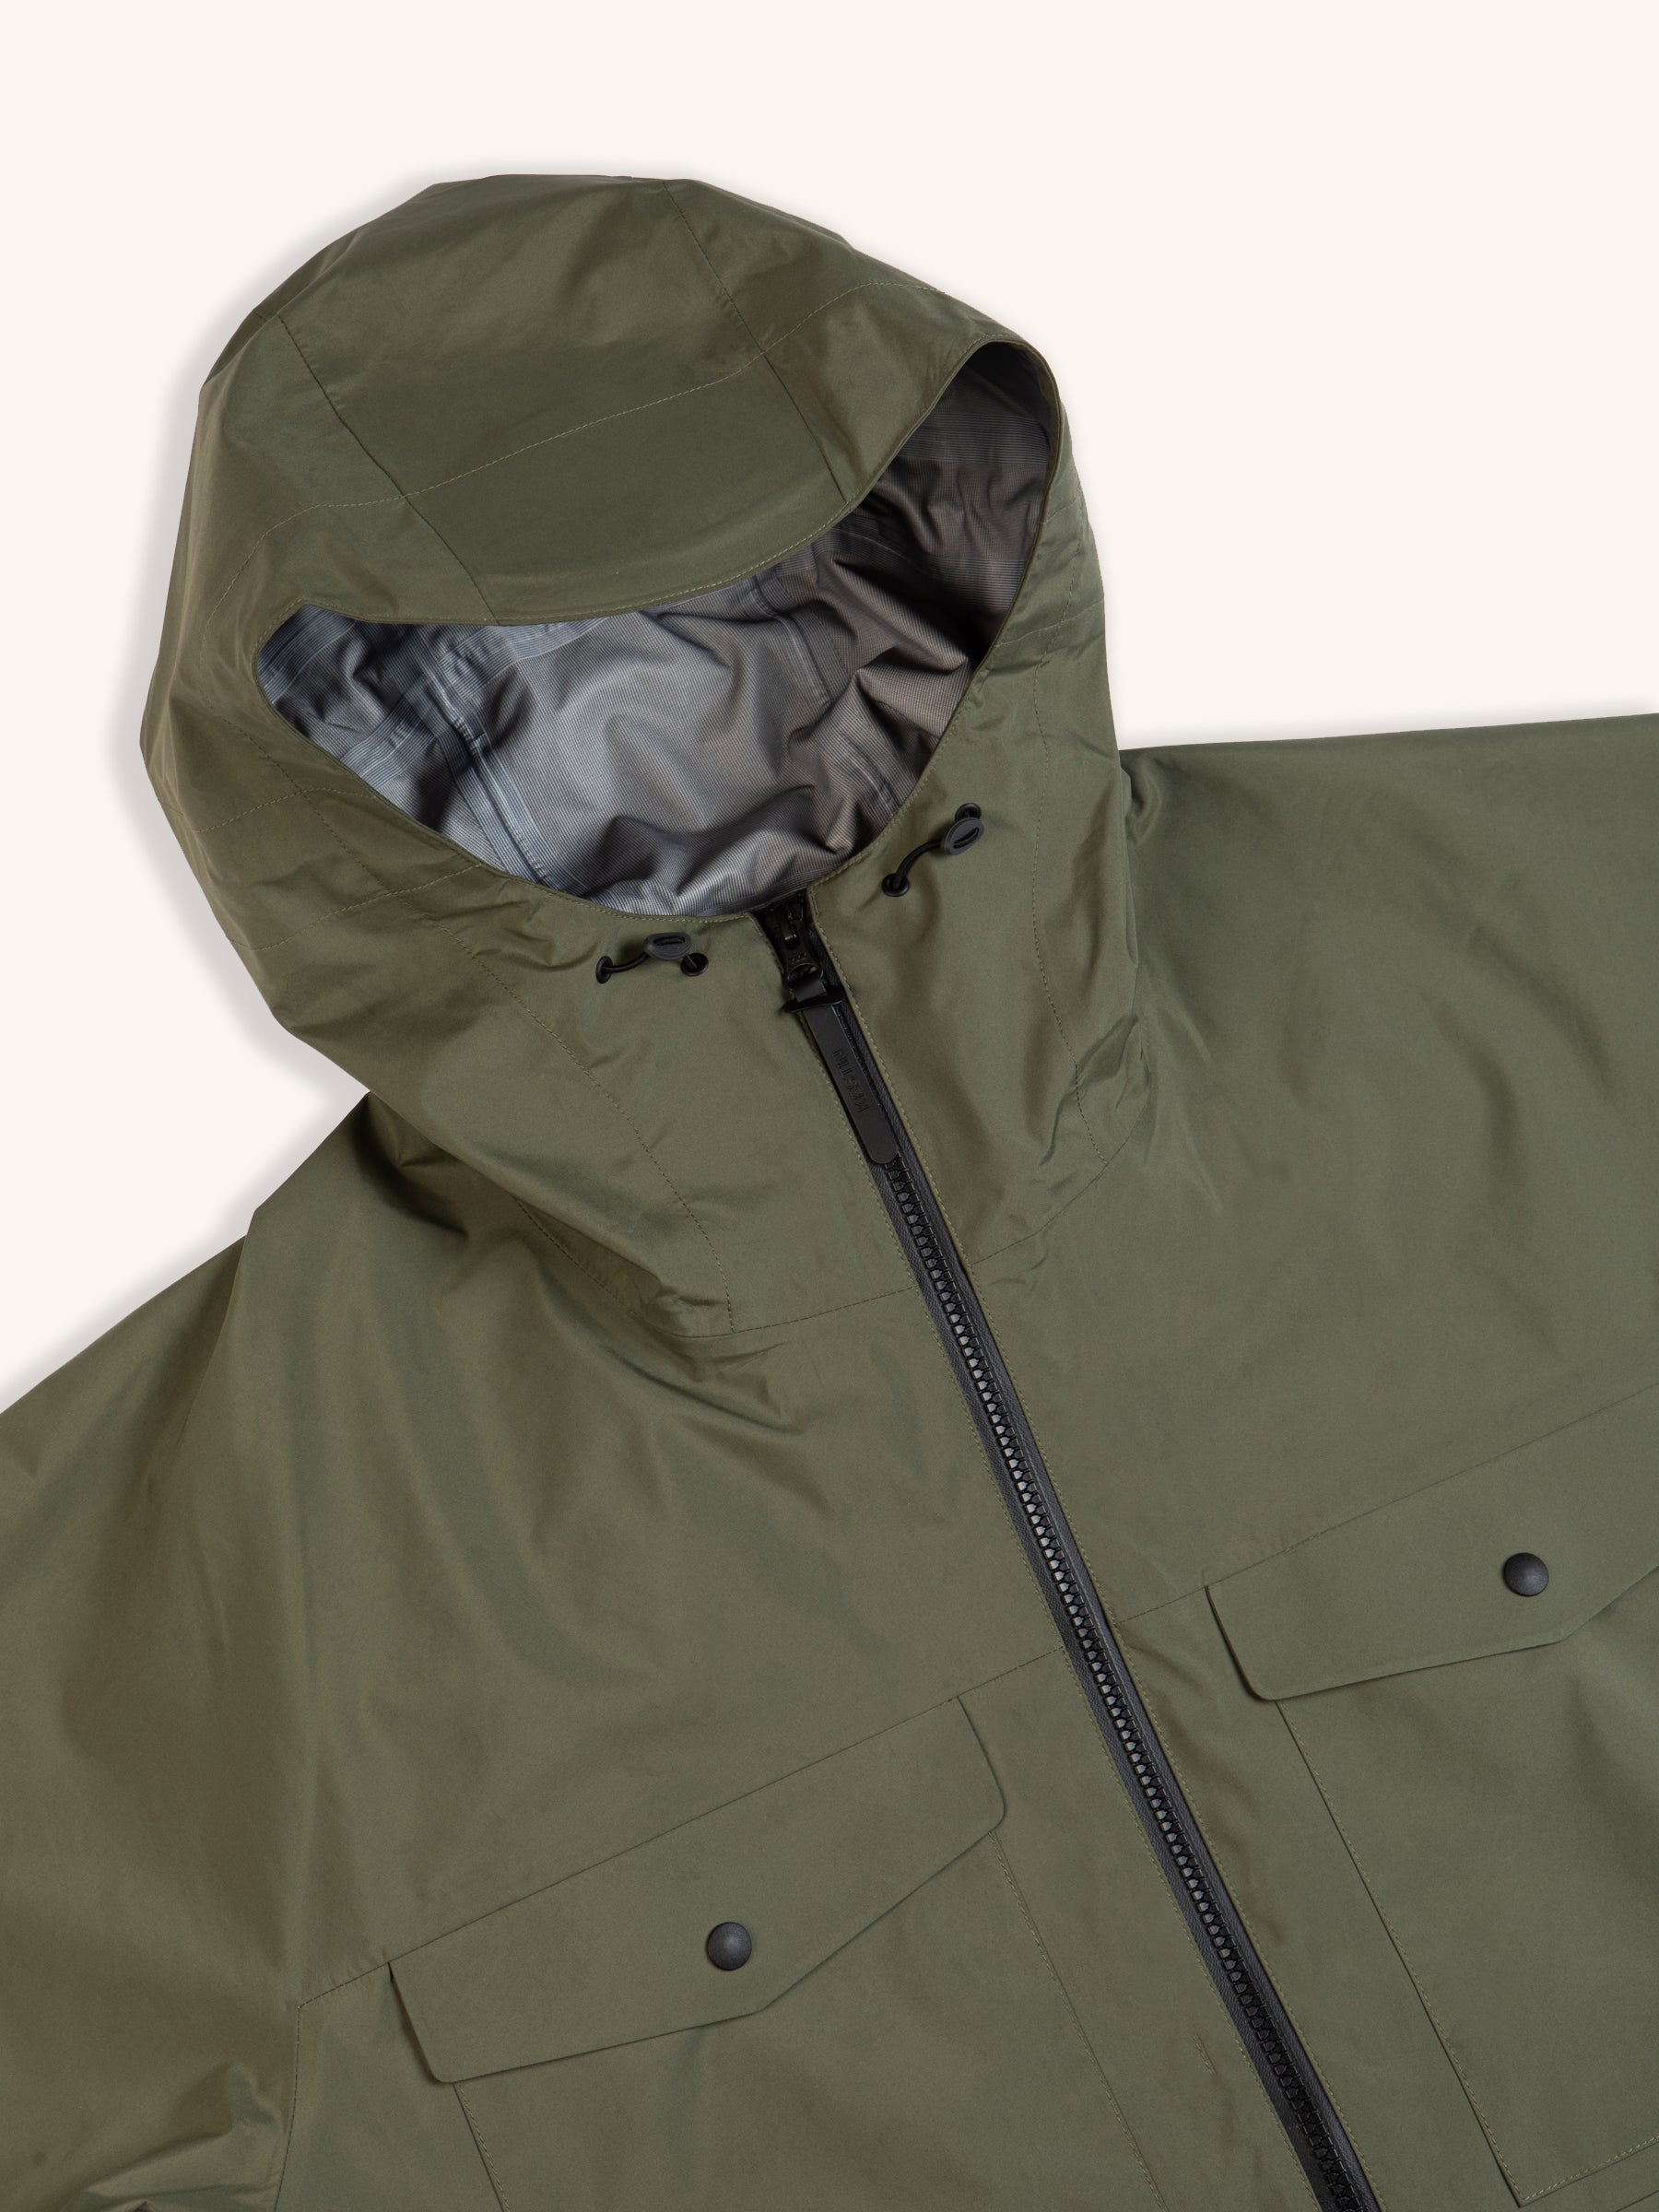 The hood of a green waterproof jacket on a white background.